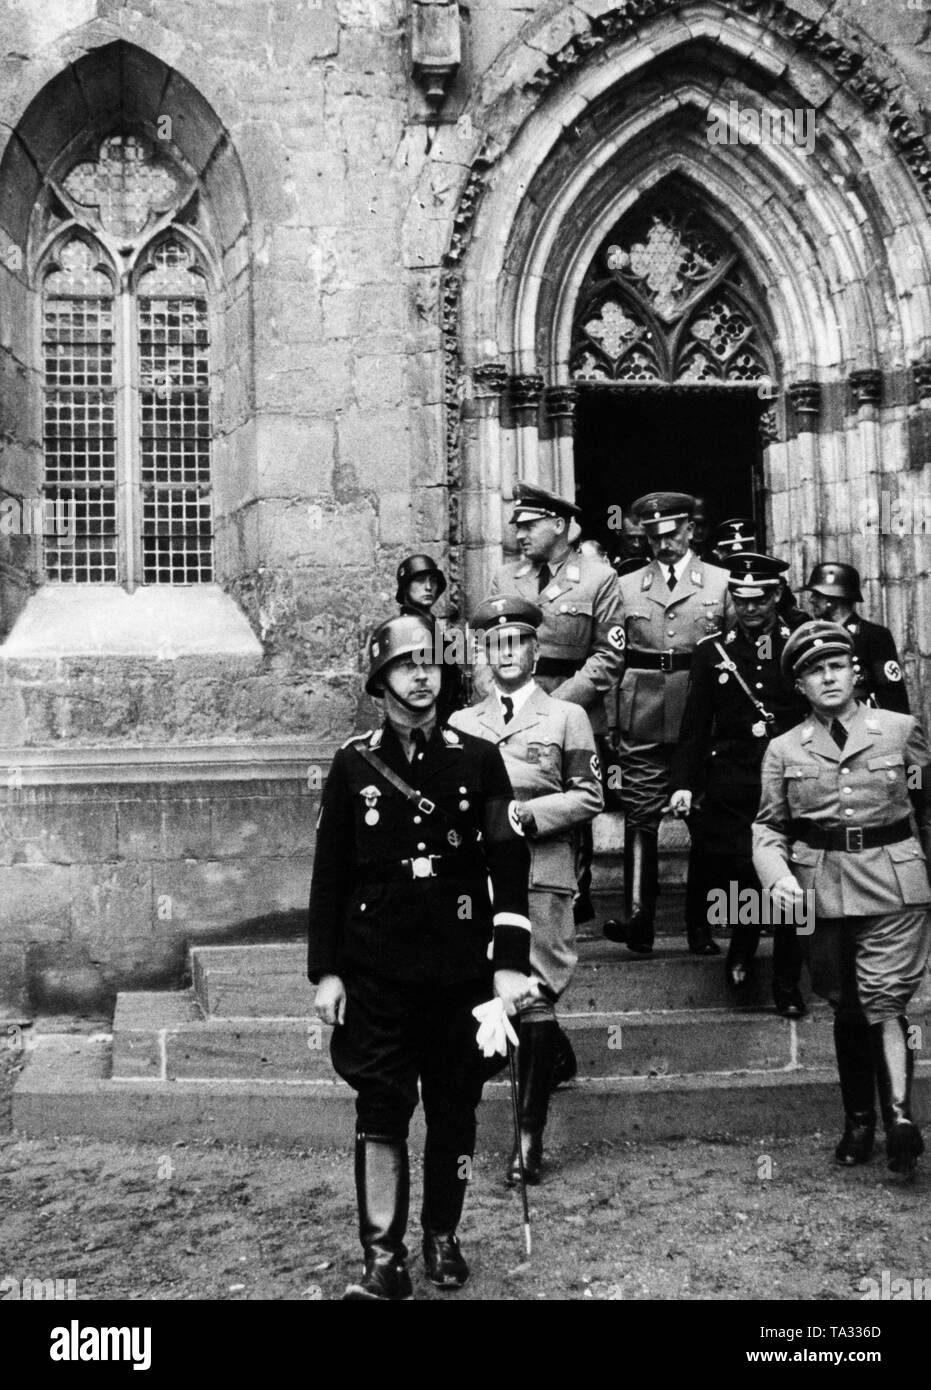 Reichsfuehrer-SS Heinrich Himmler, behind him Wilhelm Frick and Reichsleiter Martin Bormann (right) in front of the entrance of the Quedlinburger Dom (Stiftskirche St. Servatius), in which is located the grave of the German king and emperor of the Holy Roman Empire, Henry I (919-936 ) from the Liudolfinger (Ottonen) family. Henry I was venerated by Himmler especially as a founder of the empire and defender of Slavs. Himmler considered himself a reincarnation of the king and was personally present at the annual celebrations on July 2nd Stock Photo